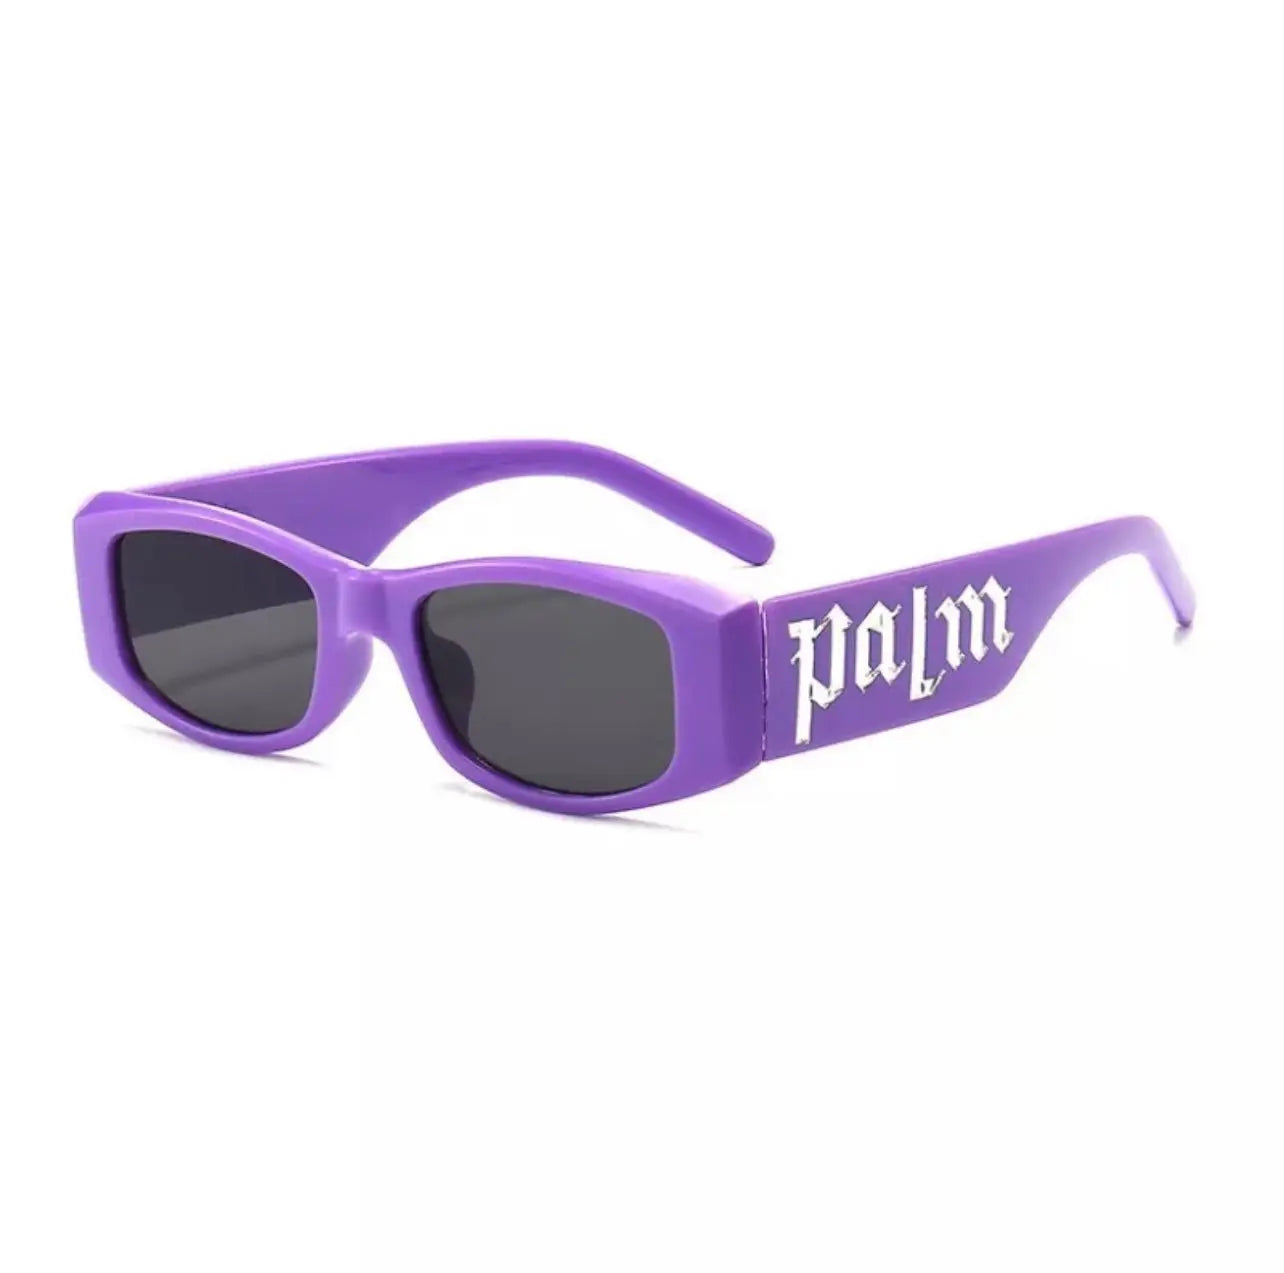 a pair of purple palm angels sunglasses with the word'palm'on them.